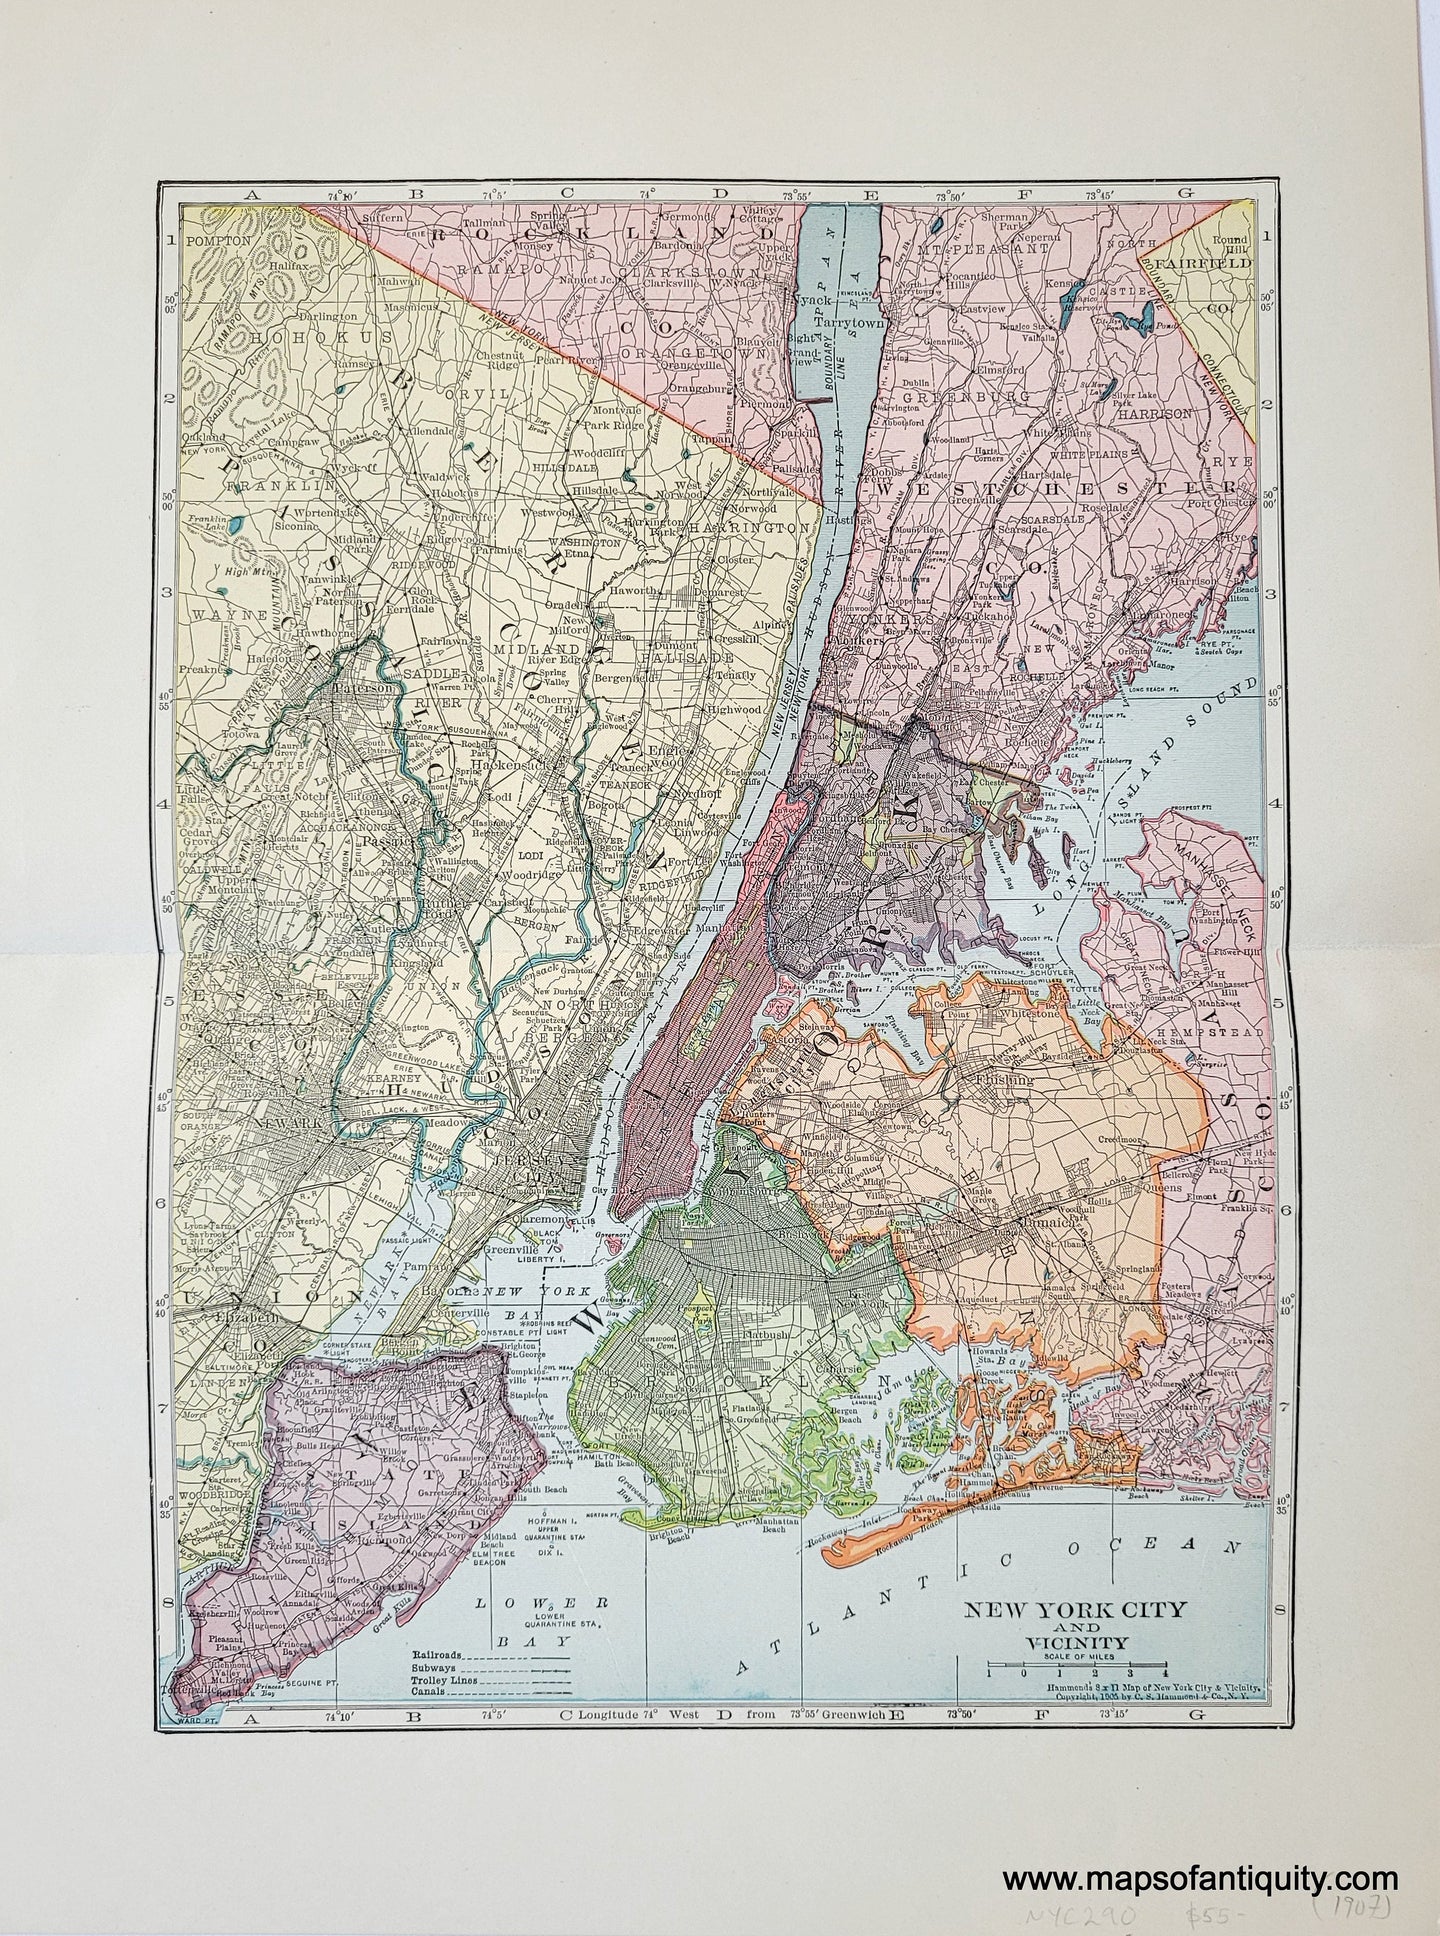 Genuine-Antique-Map-New-York-City-and-Vicinity-1907-Hammond-Maps-Of-Antiquity